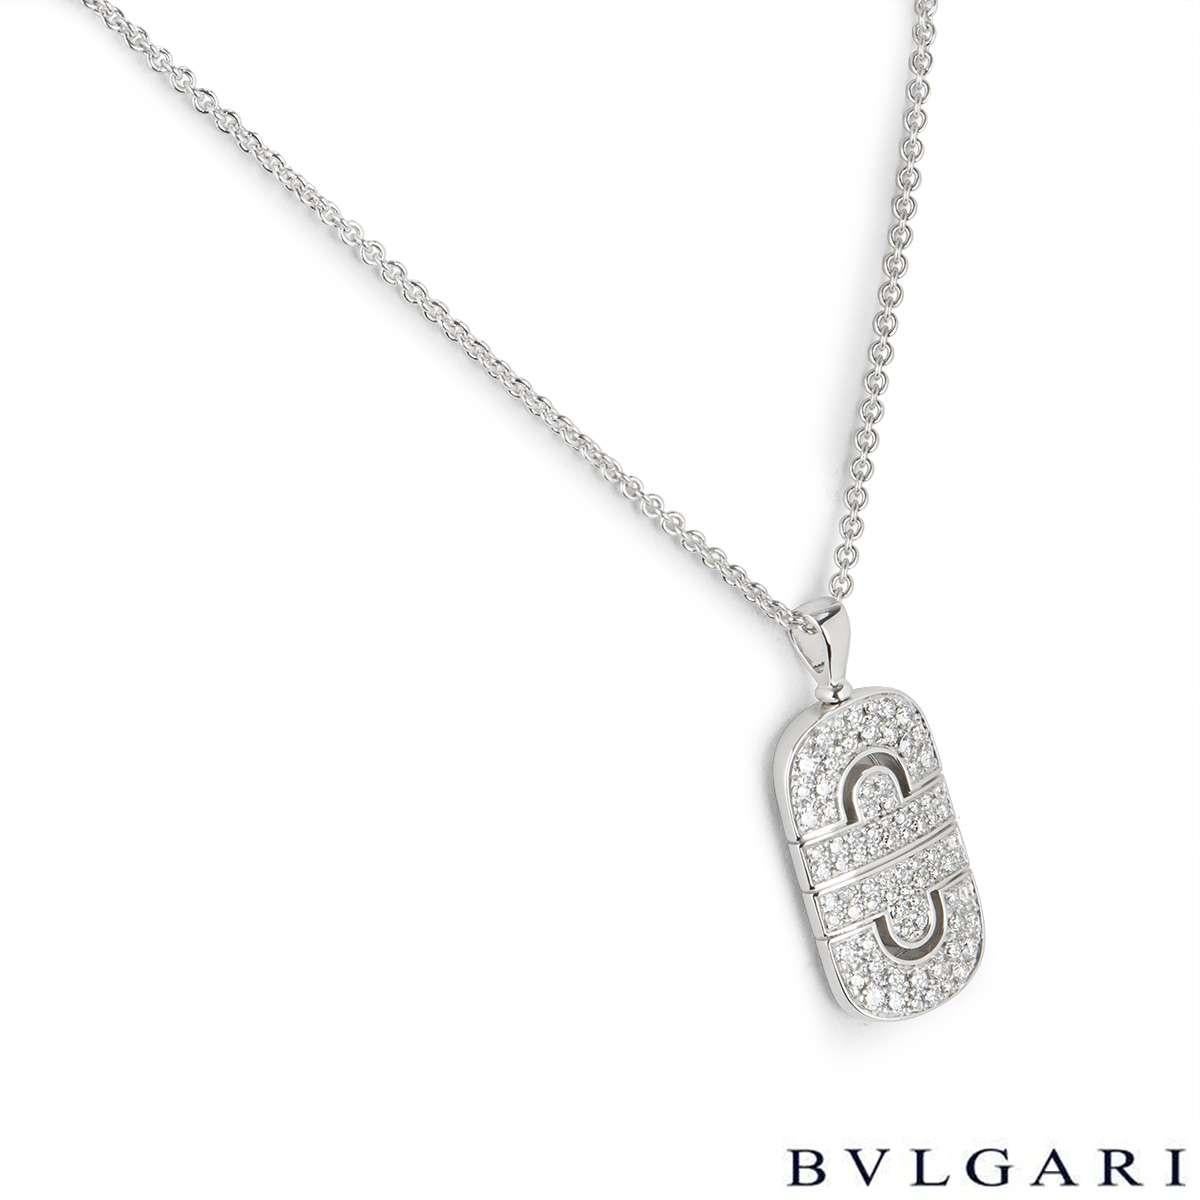 An 18k white gold Parentesi pendant by Bvlgari. The pendant comprises of the Parentesi motif with diamonds in a pave setting. The pendant is set with 82 round brilliant cut diamonds totalling approximately 1.02ct. The pendant comes on an adjustable